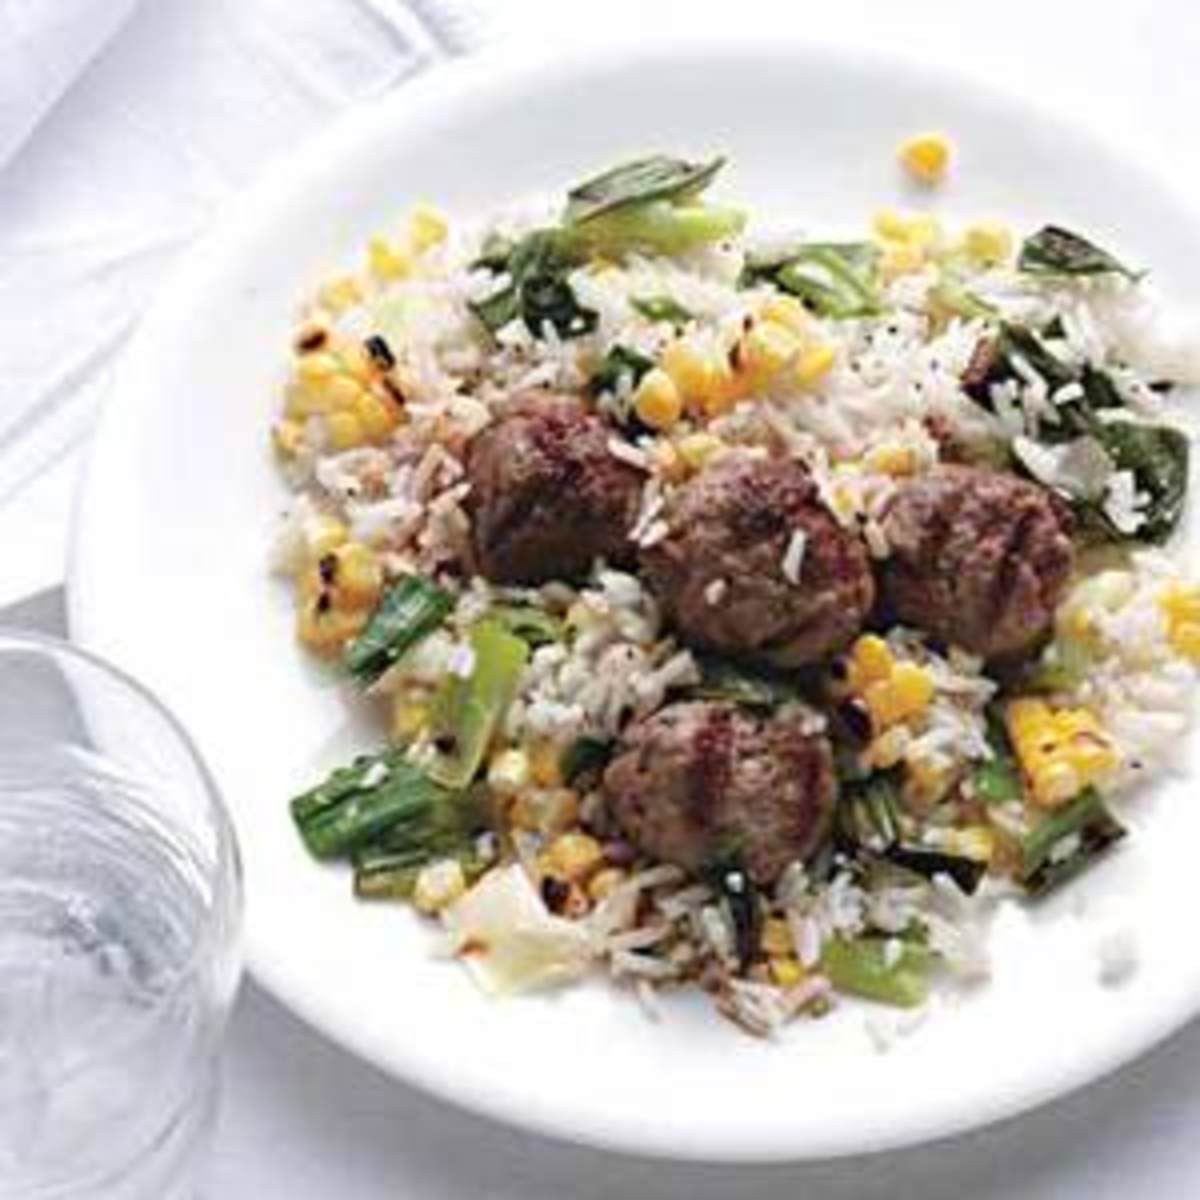 Rice Pilaf Recipe Rachael Ray
 Spiced Lamb with Corn and Rice Pilaf Rachael Ray Every Day